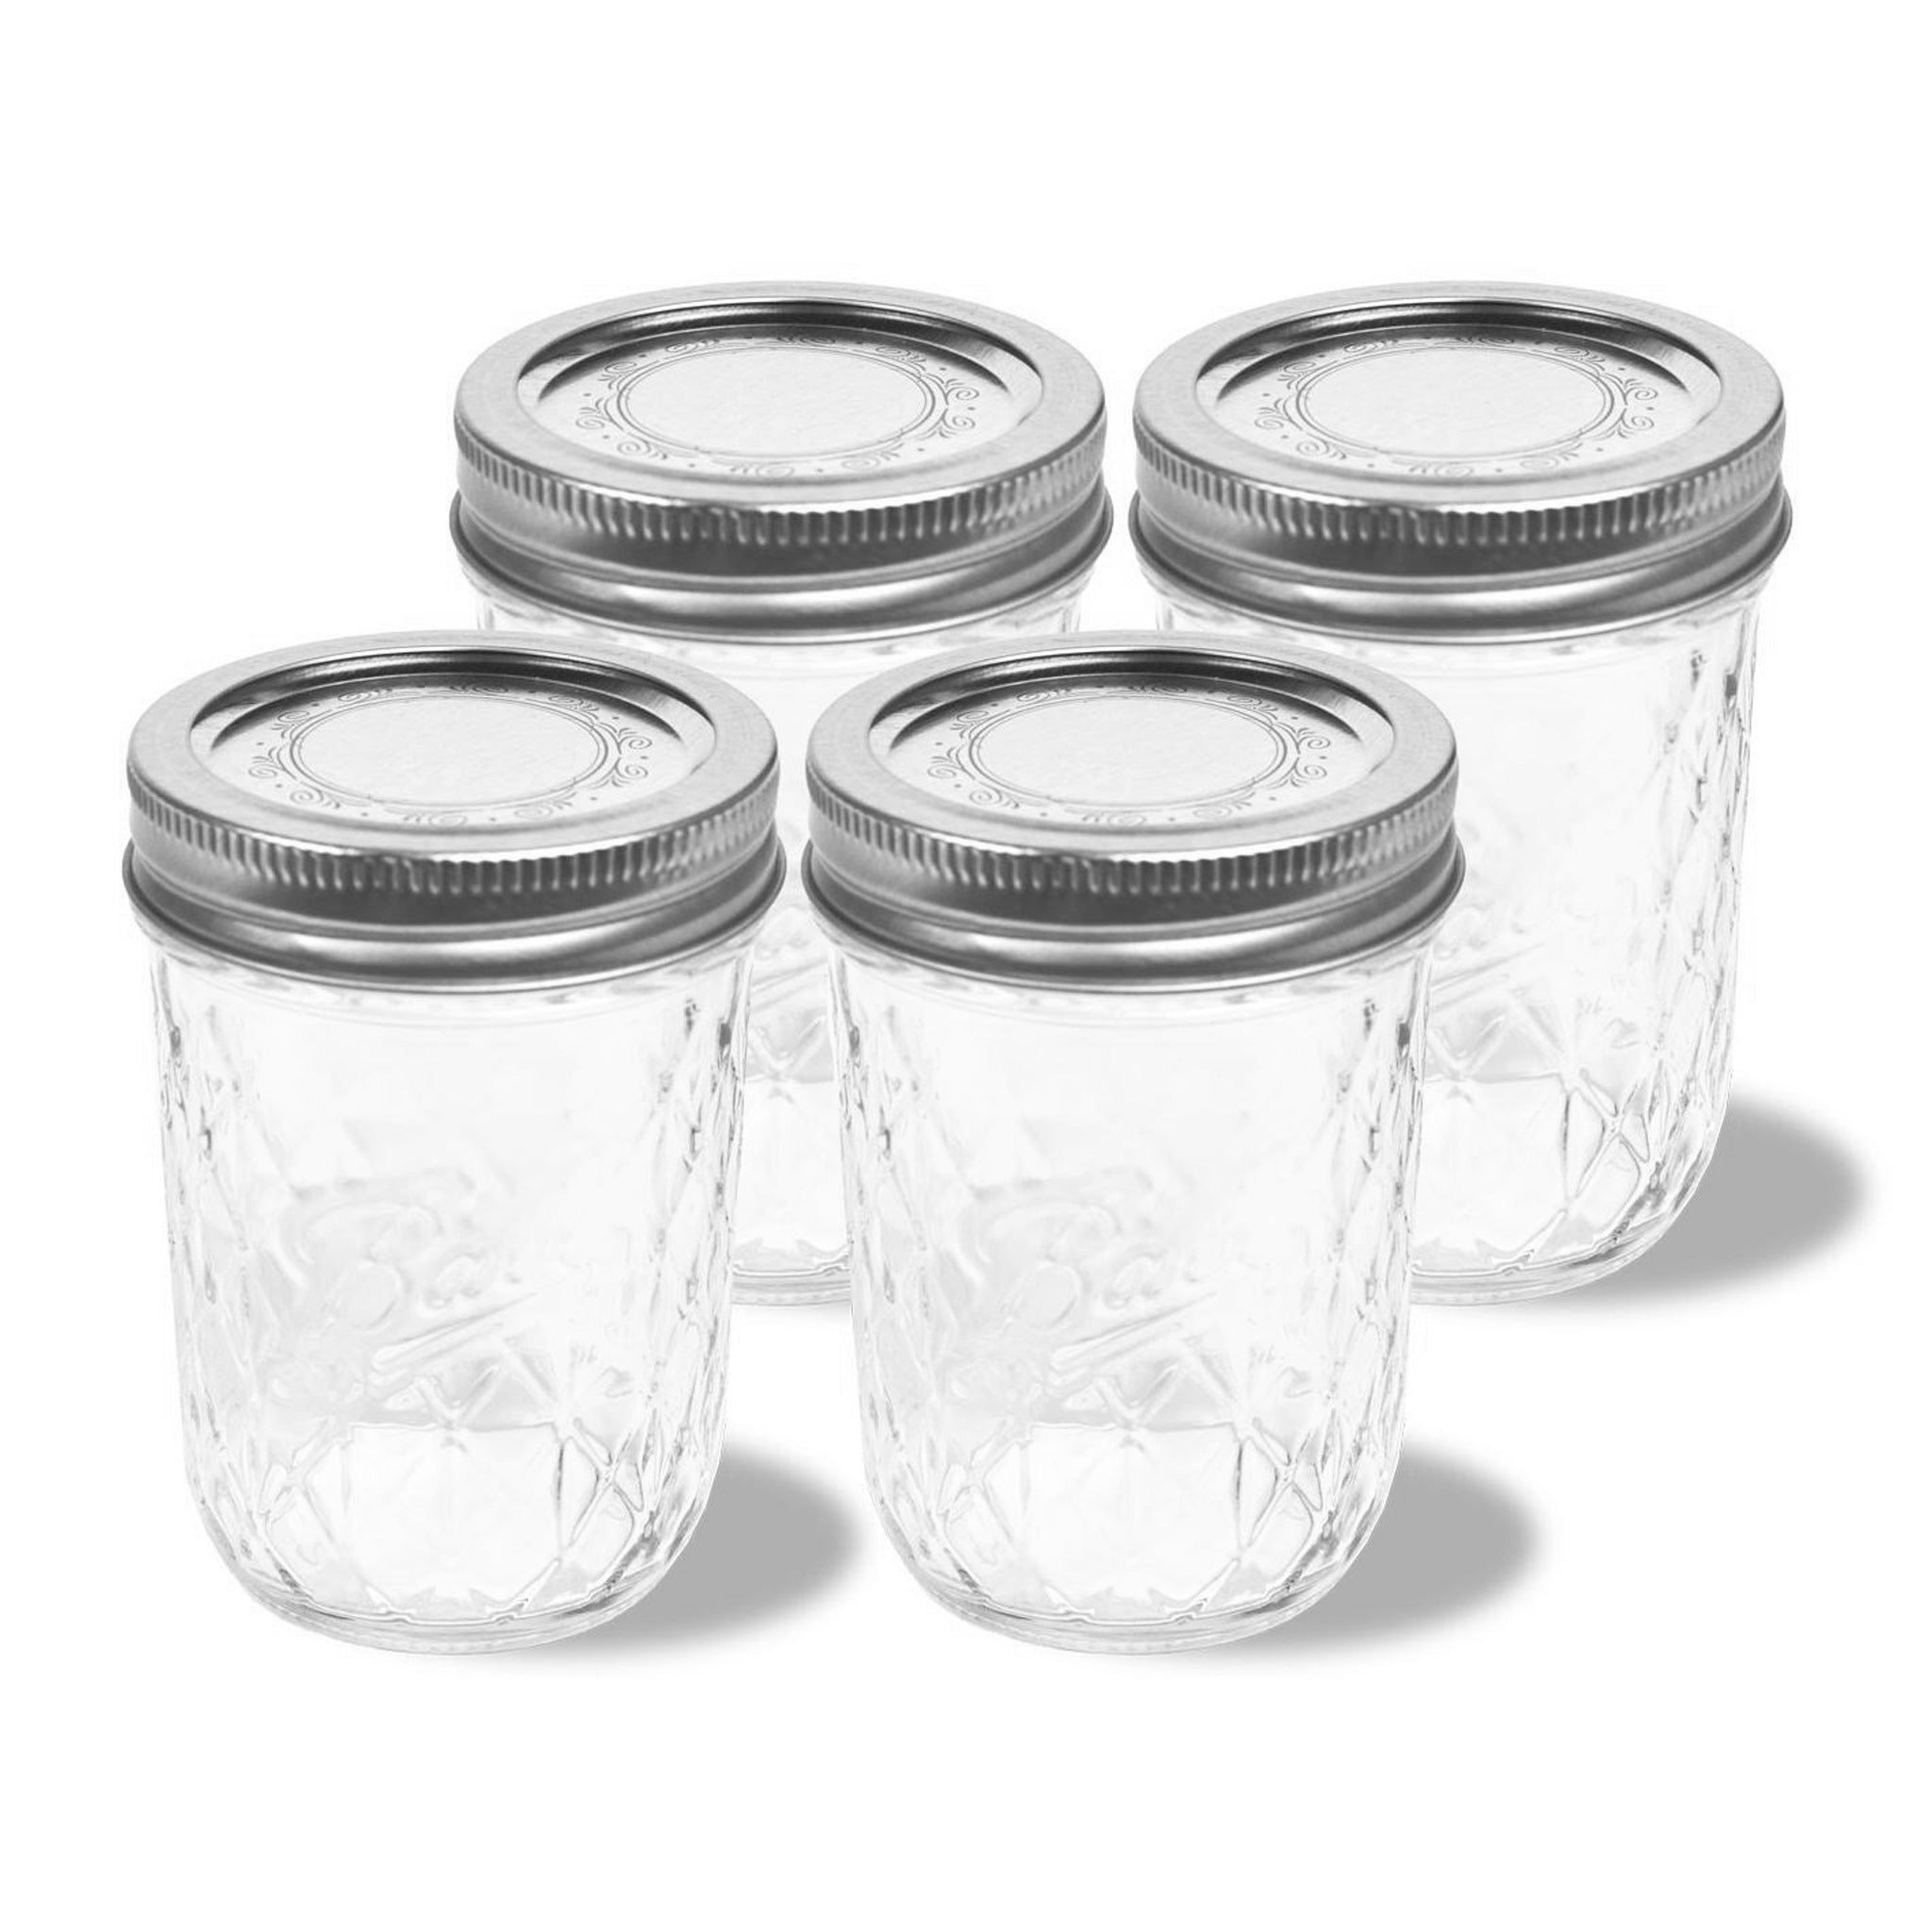 4-Pack Mason Jars (8 oz each) for the Personal Blender®. Blend up delicious smoothies, herbs, coffee beans, baby food and more. Store your recipes in these convenient and easy-to-use jars.